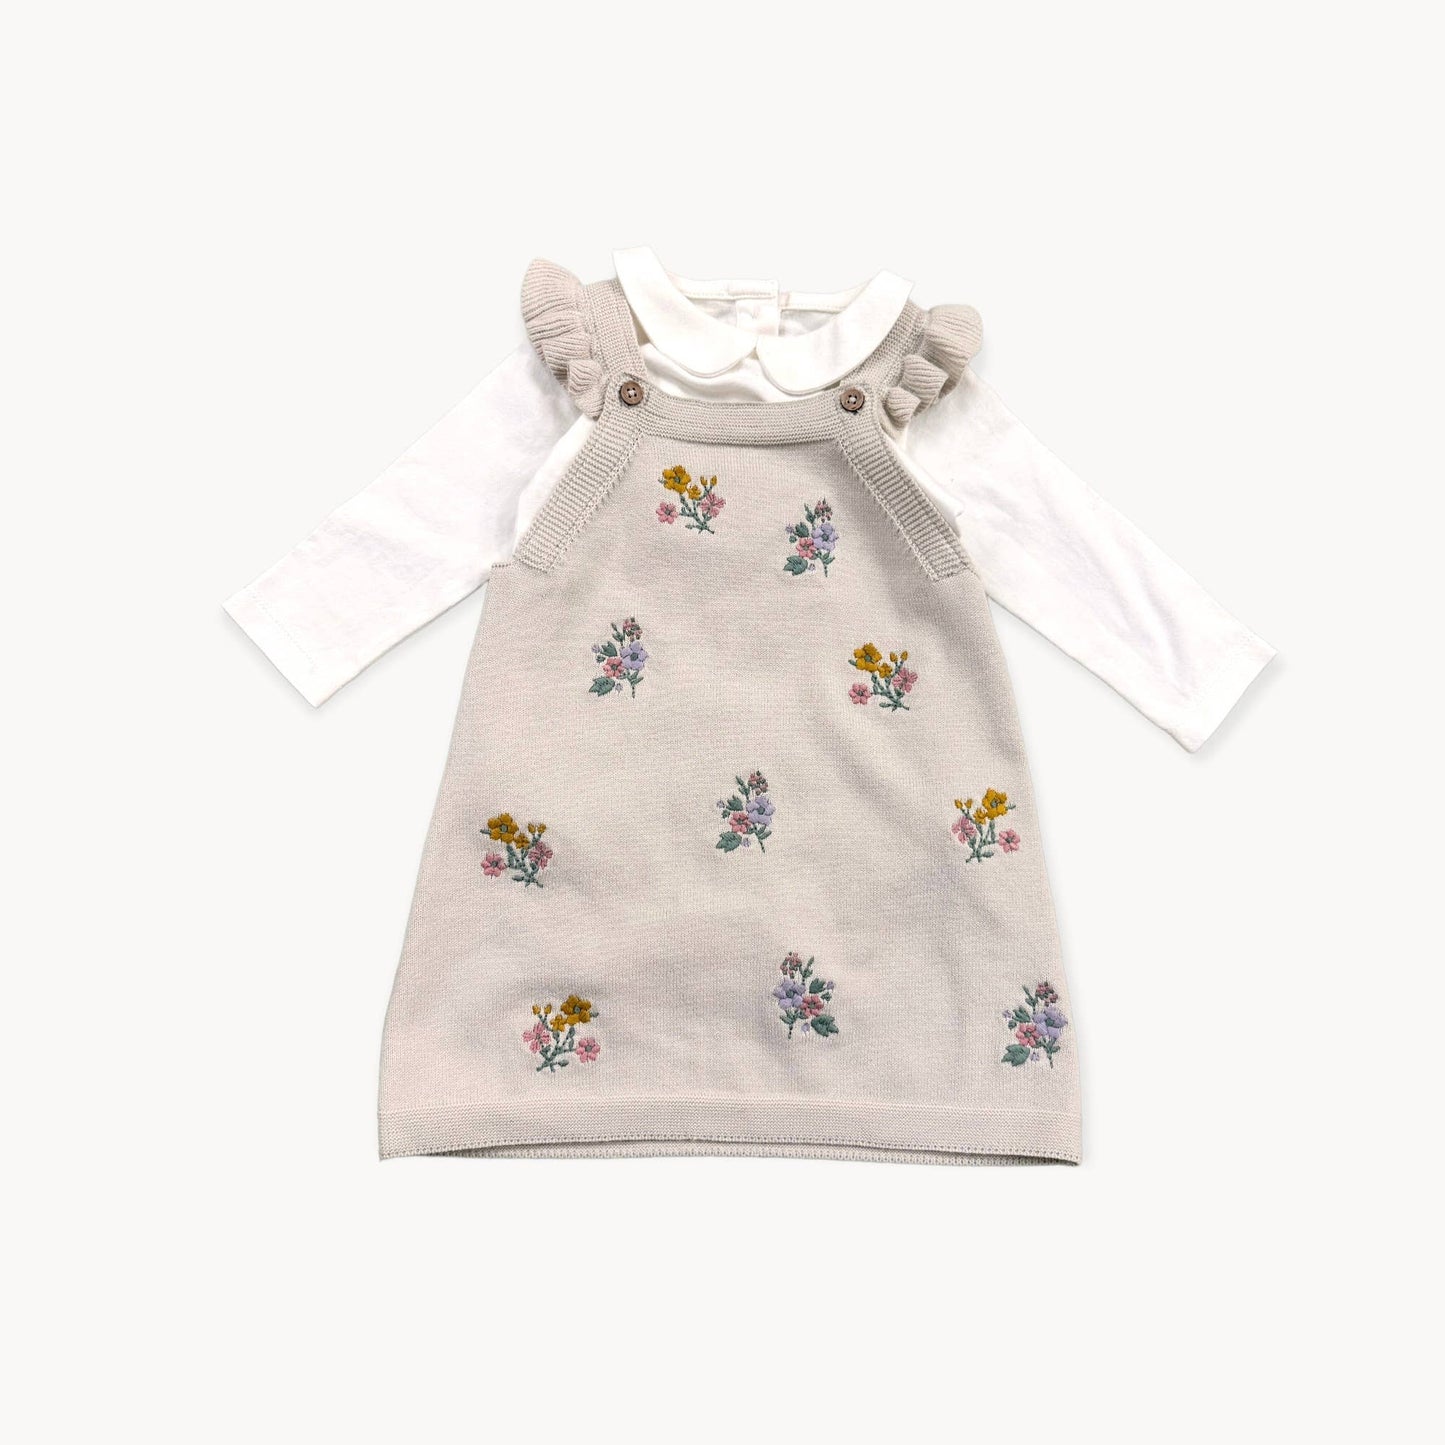 Viverano Organics - Floral Embroidered Tunic Baby Knit Dress Set